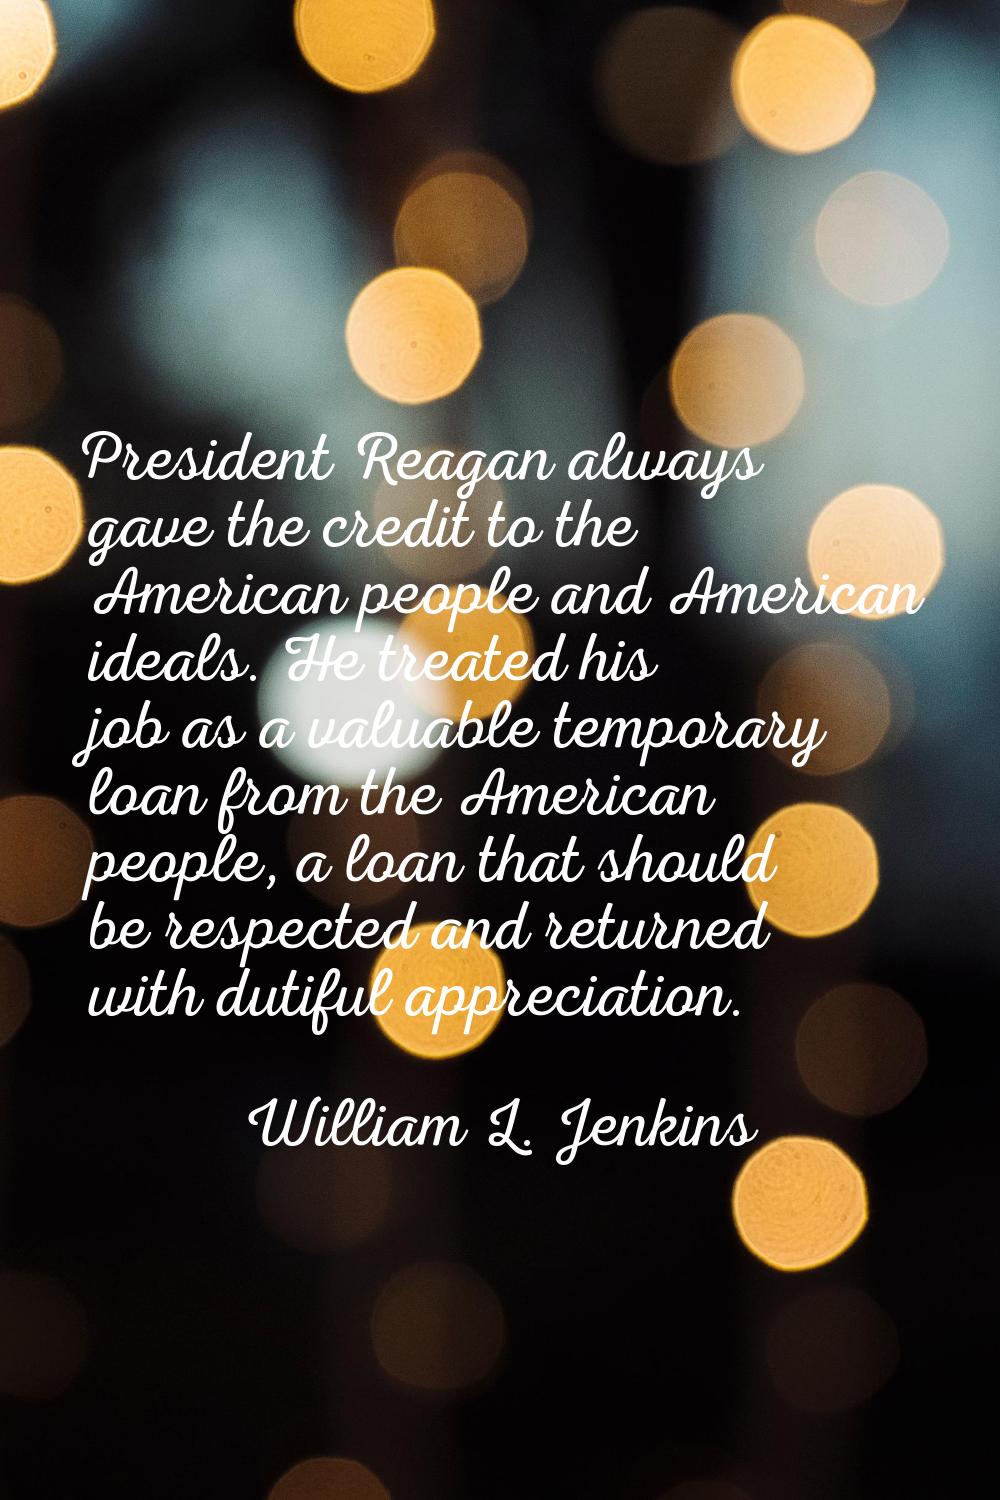 President Reagan always gave the credit to the American people and American ideals. He treated his 